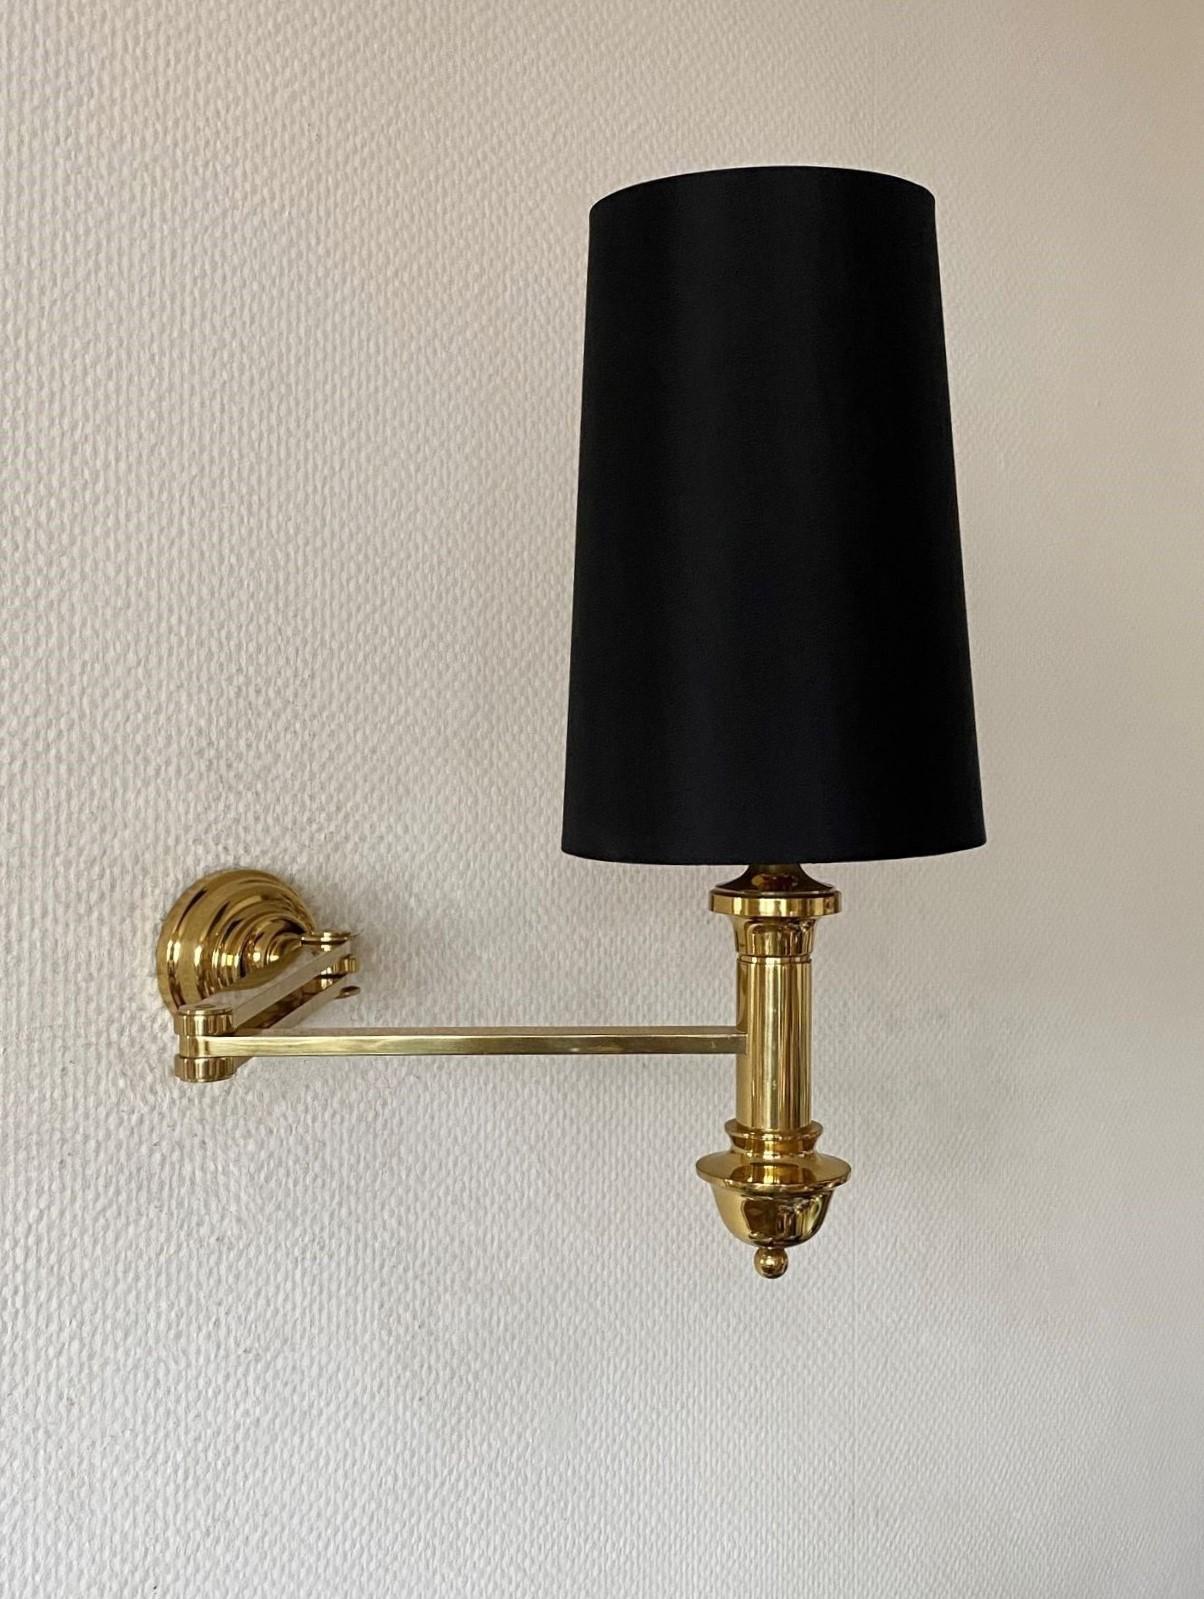 Pair of Maison Jansen Style Brass Swing Arm Wall Sconces Lights, 1960s For Sale 1